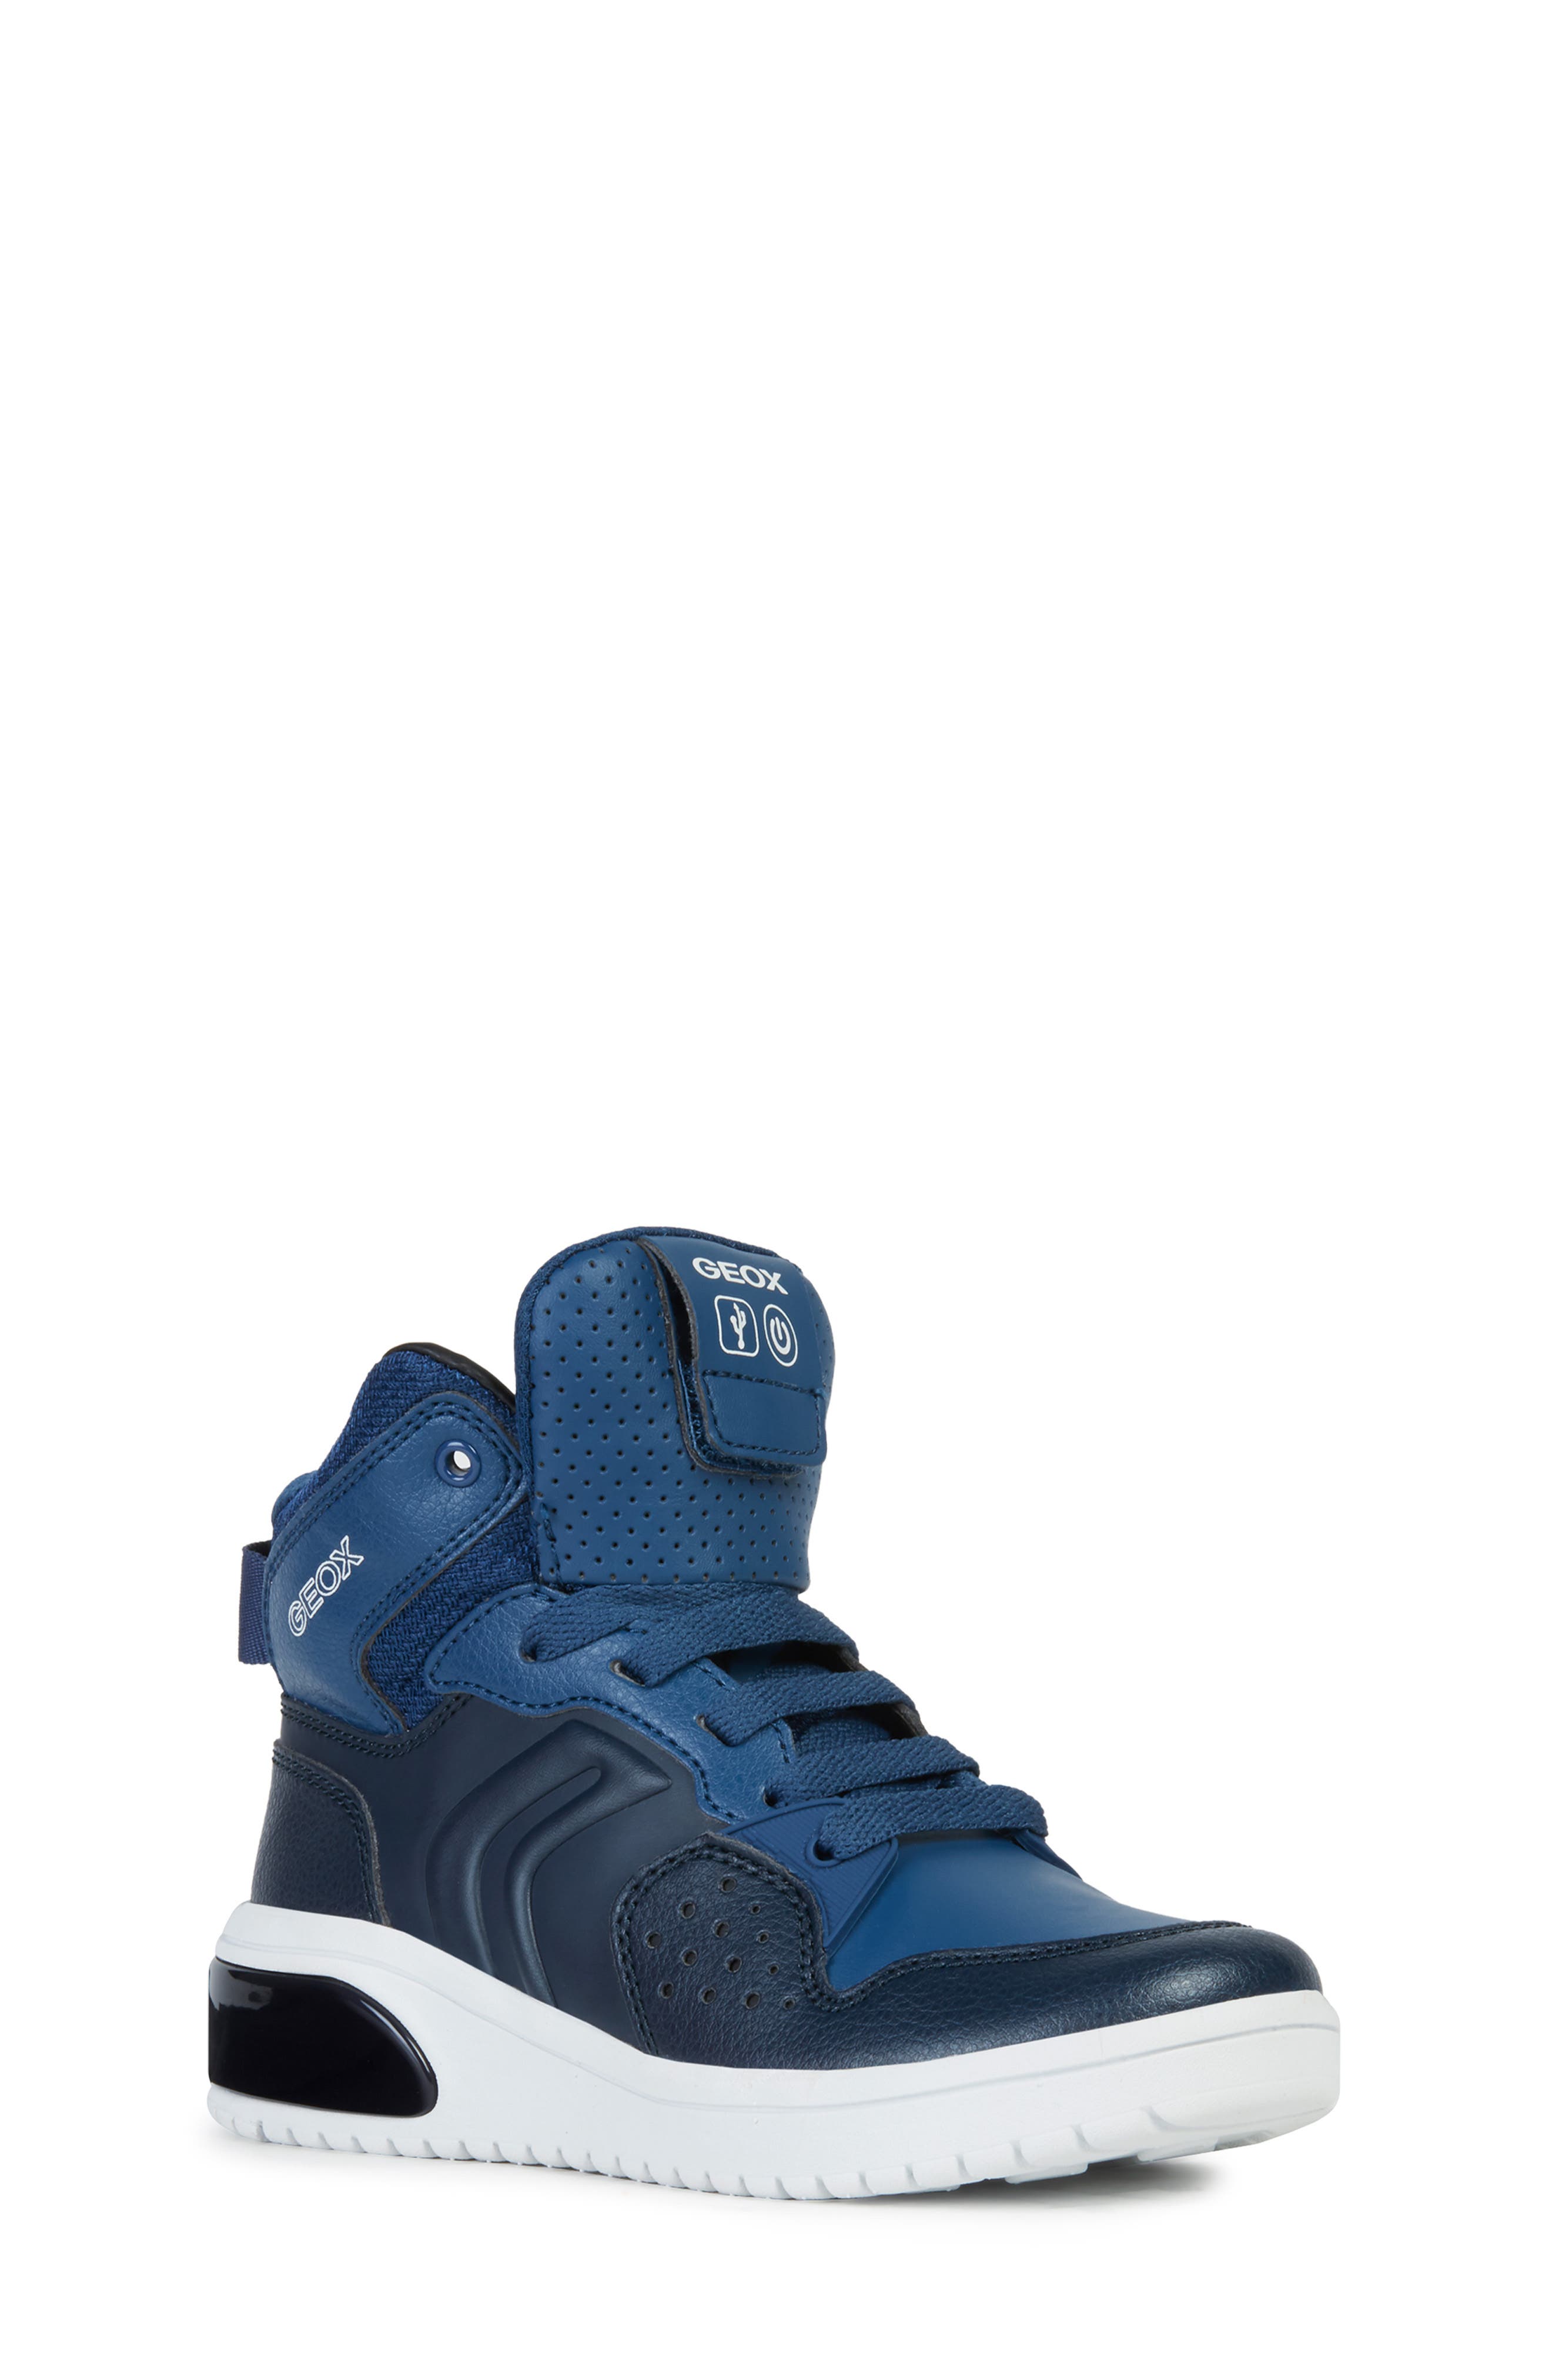 geox bluetooth shoes